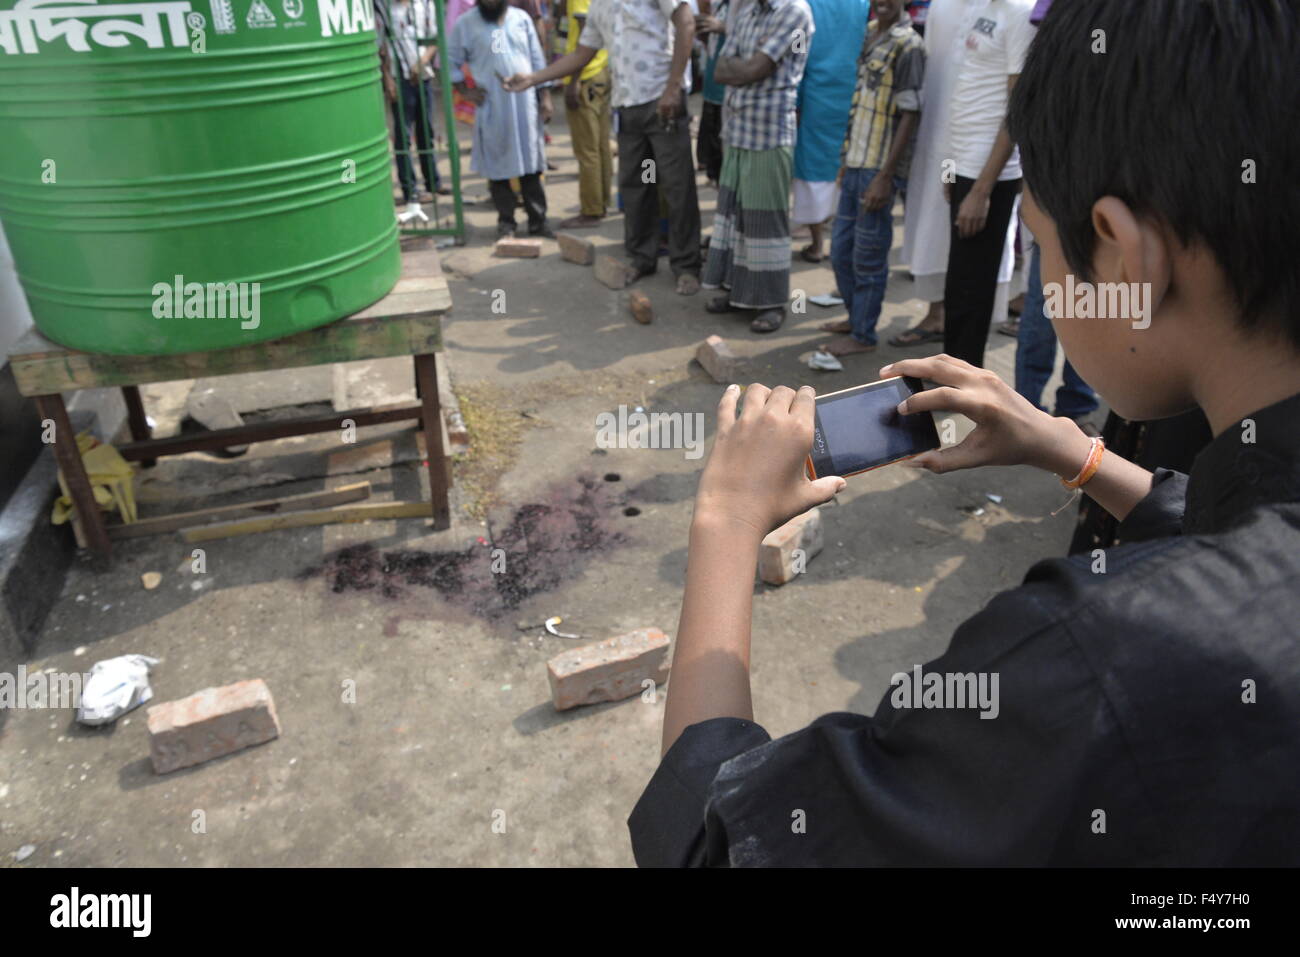 Peoples gathered at bomd blast spot in Old Dhaka’s Hossaini Dalan area after the explosions in Bangladesh. On October 24, 2015 At least one person was killed and over 60 injured in a bomb attack outside the main Shiite site in the Bangladeshi capital, as thousands gathered for the annual Ashura procession. Stock Photo